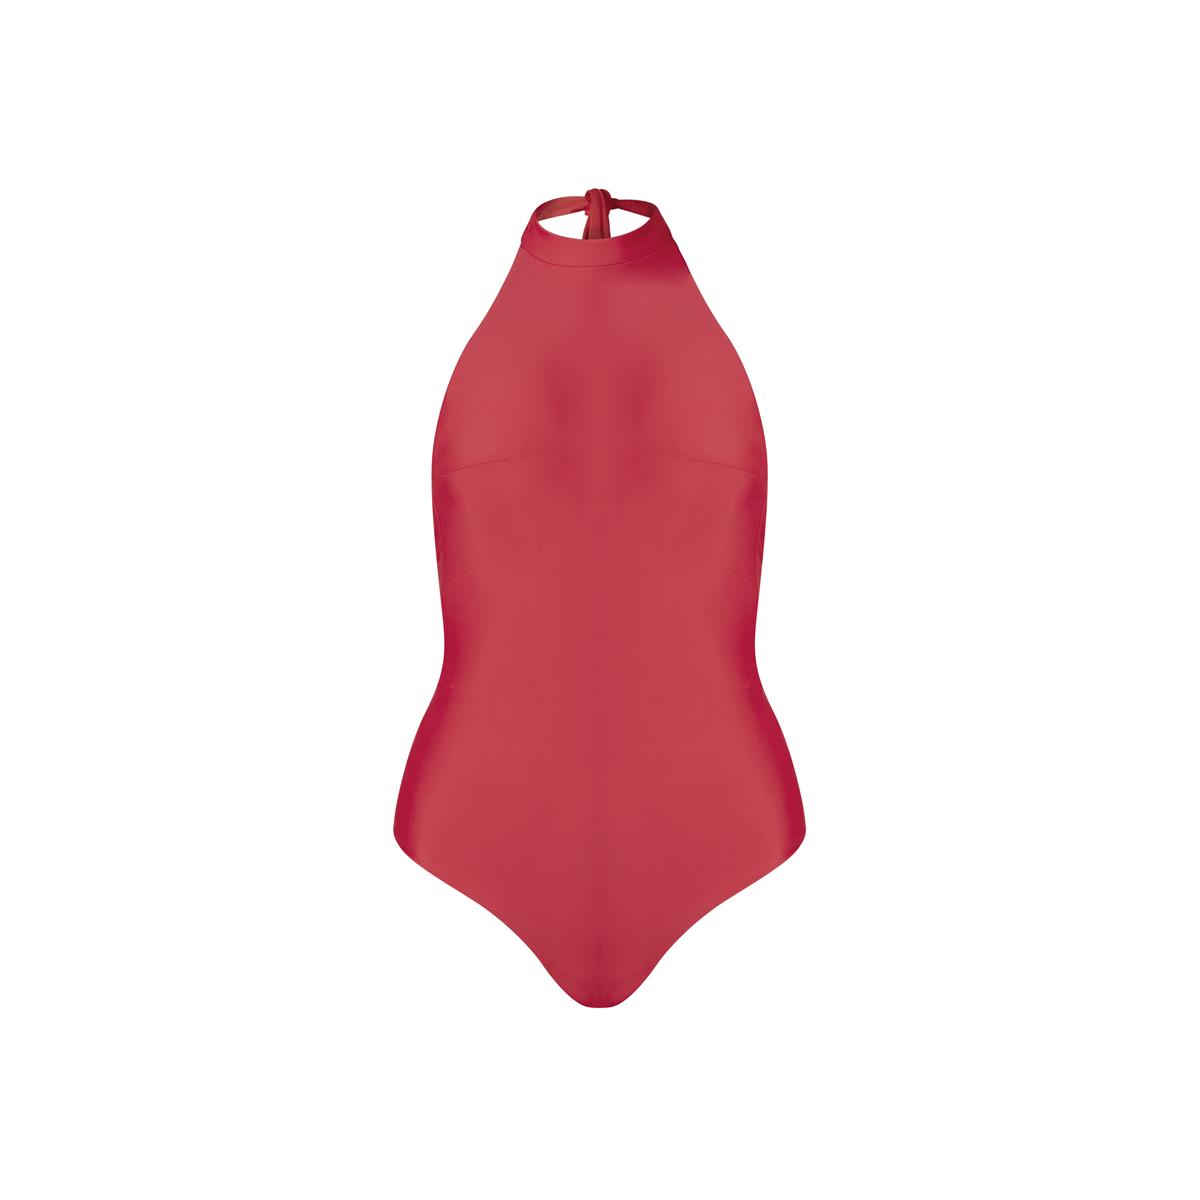 MARGARET AND HERMIONE_SS19_Swimsuit No.4_dark red_EUR 157,00